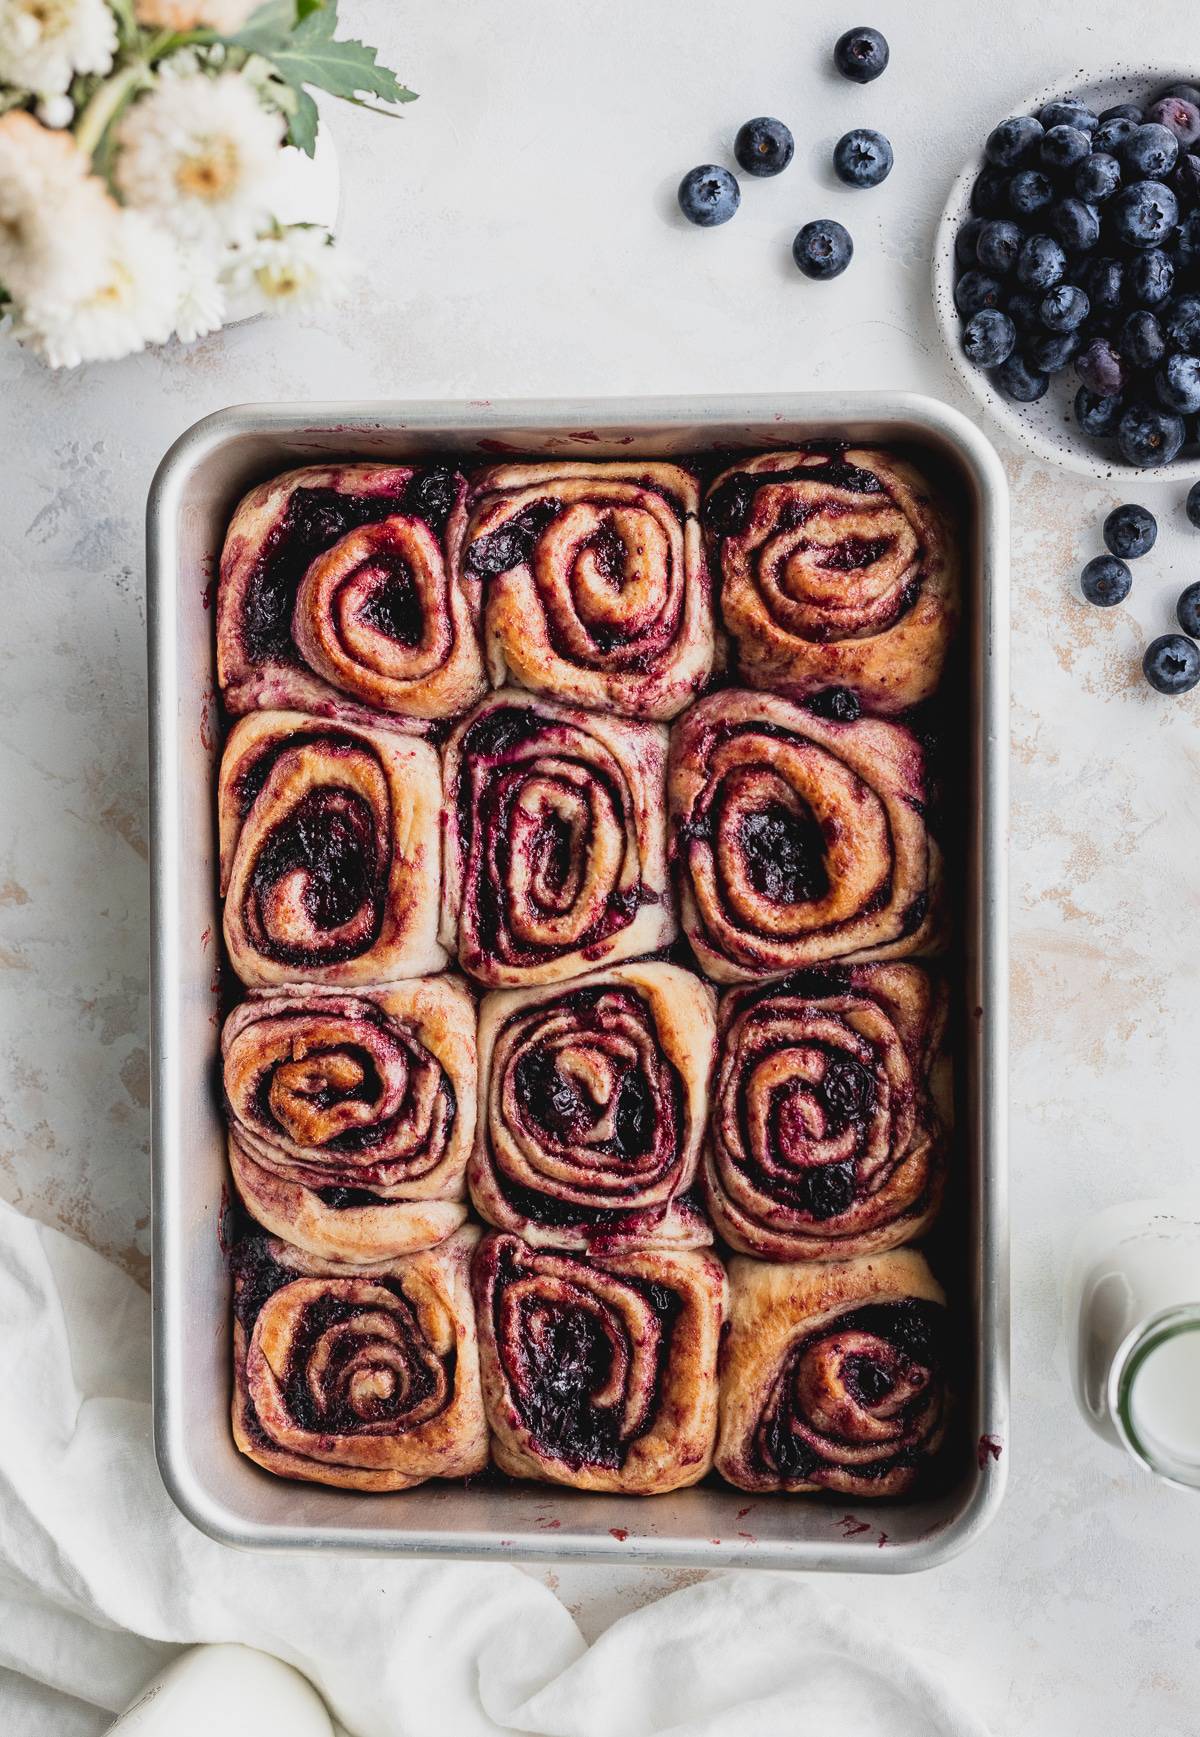 Blueberry cinnamon rolls with no frosting in the pan.